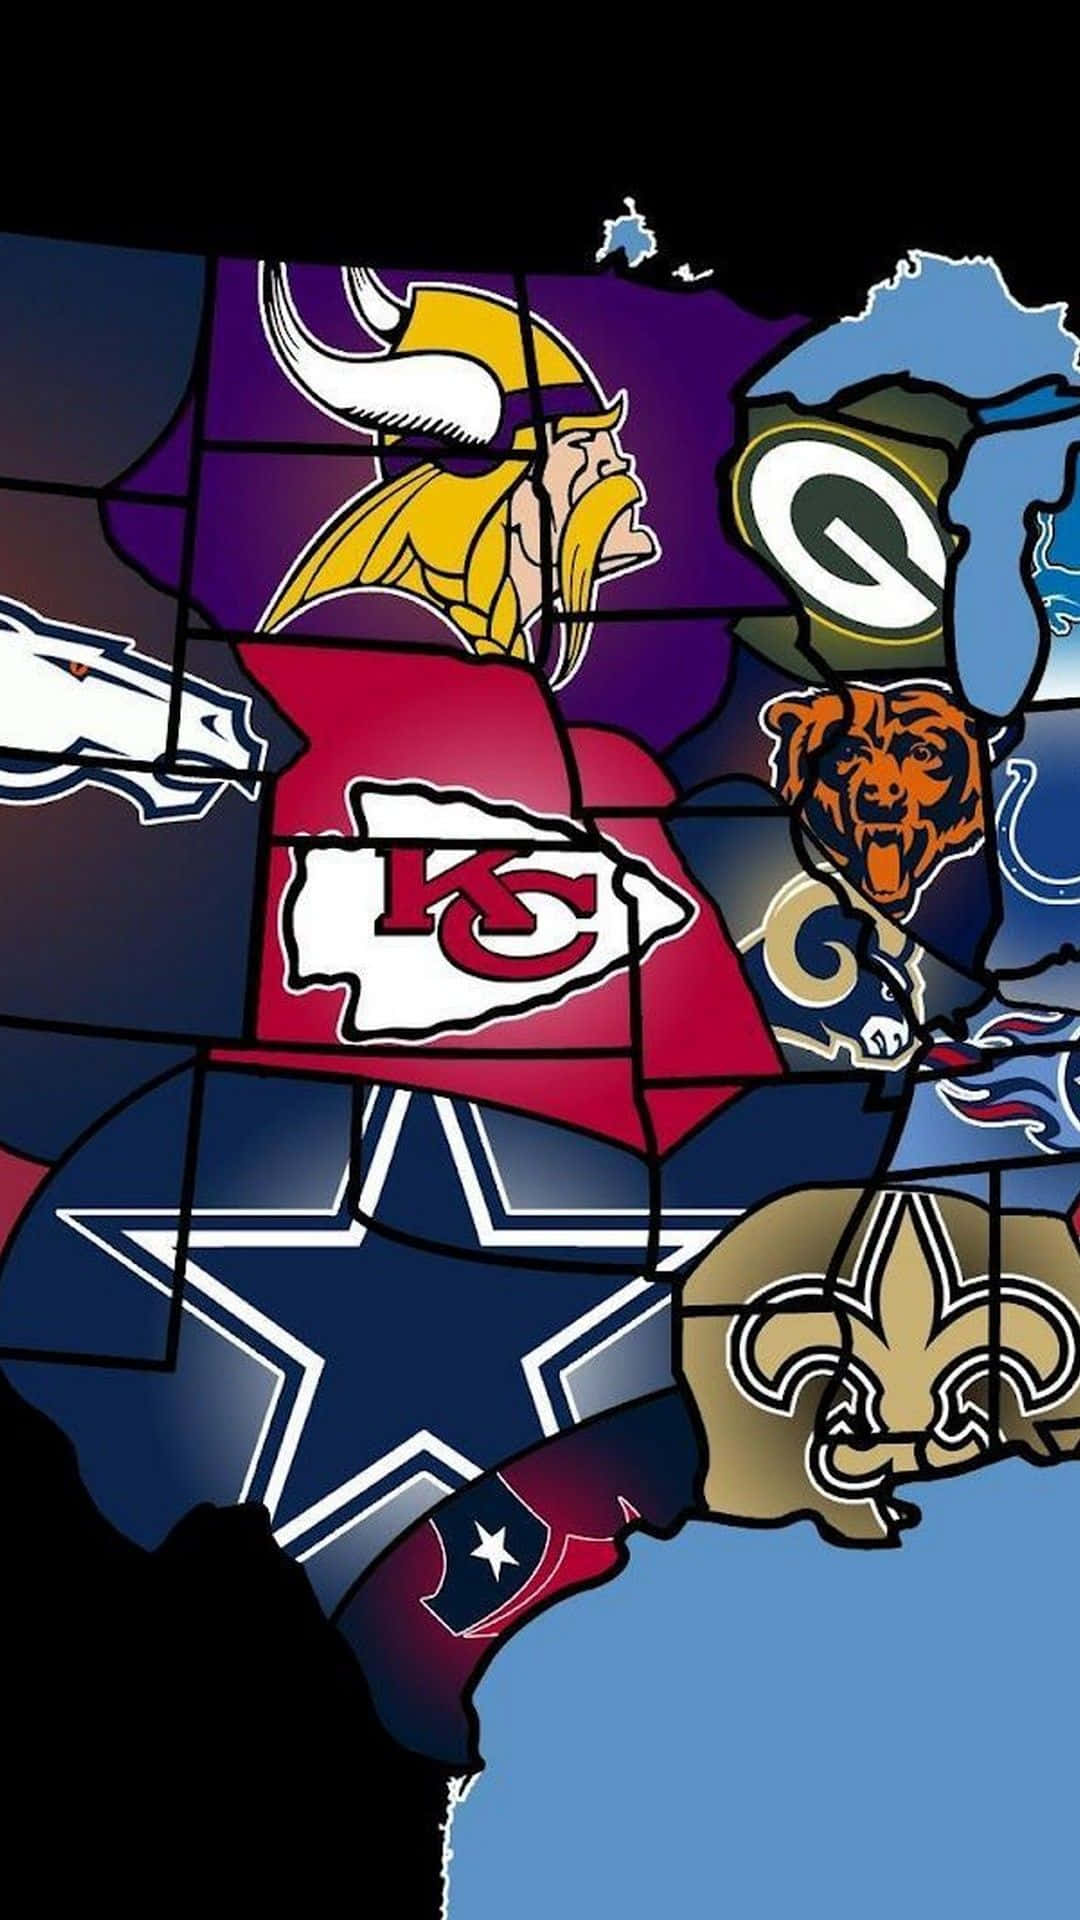 Nfl Logos On A Map Of The United States Wallpaper